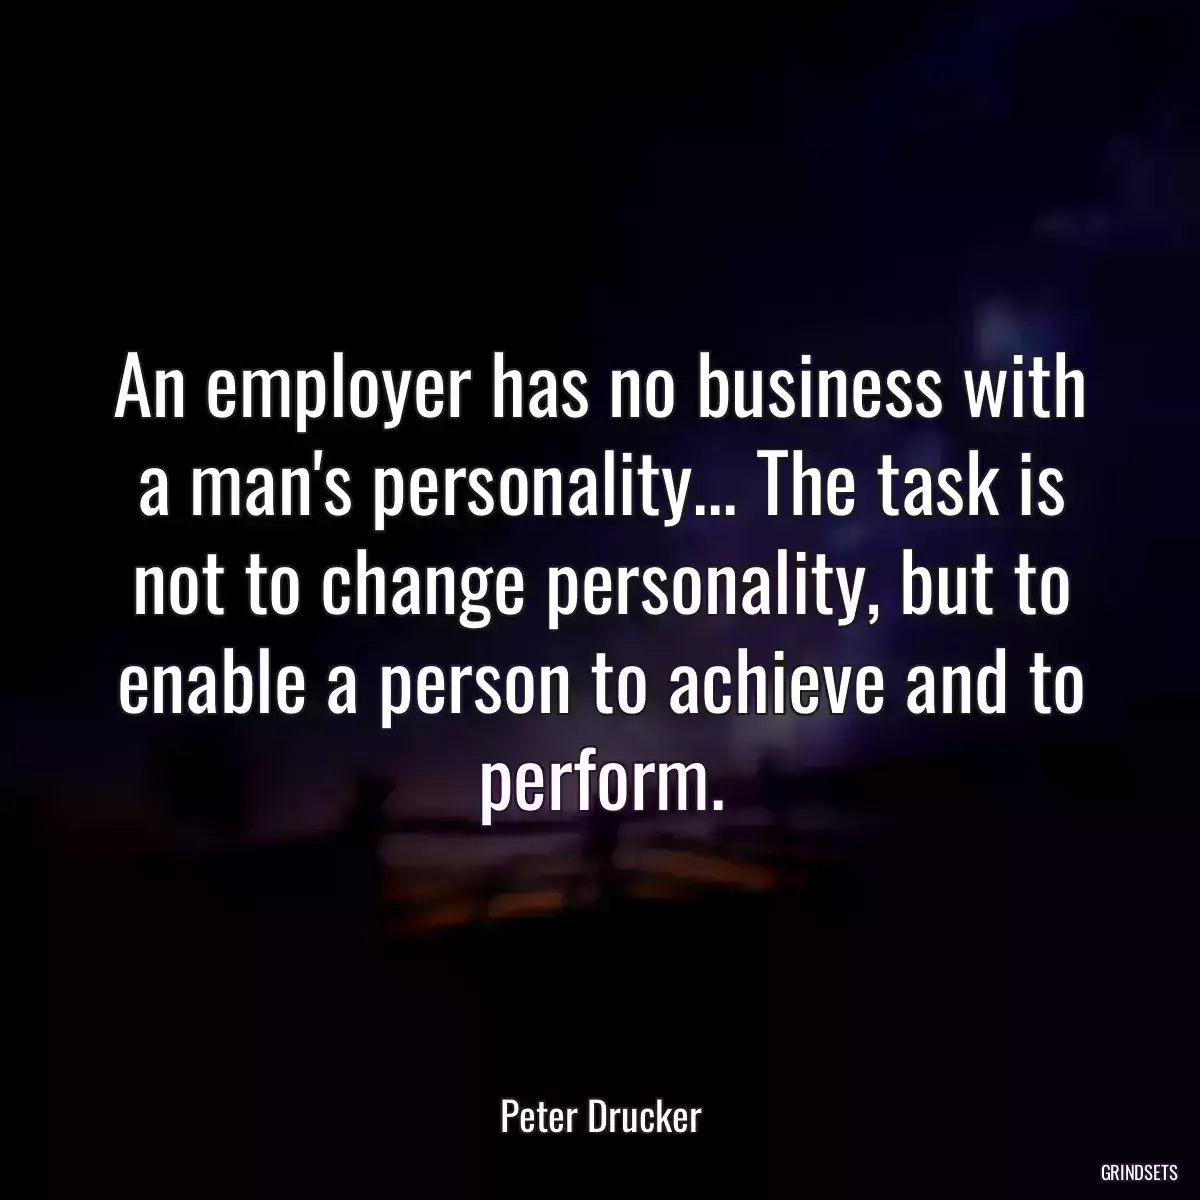 An employer has no business with a man\'s personality... The task is not to change personality, but to enable a person to achieve and to perform.